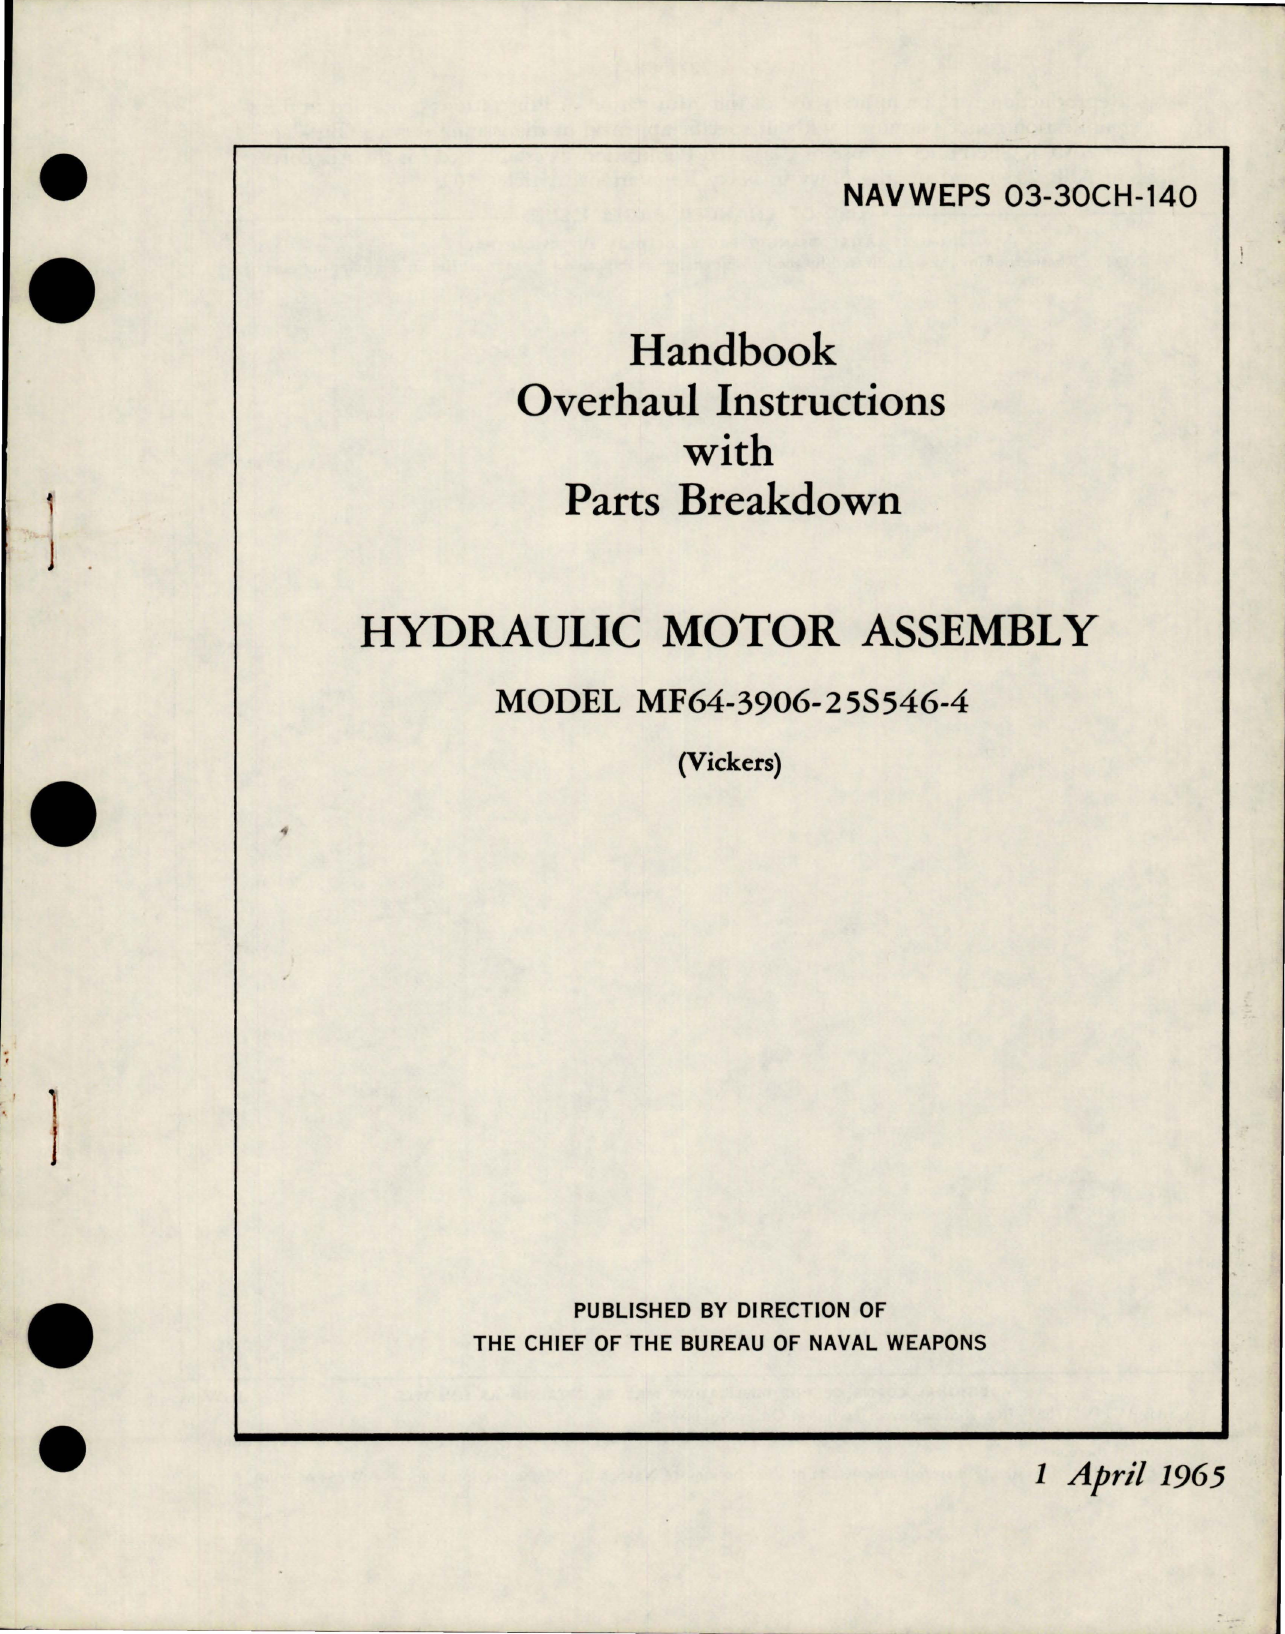 Sample page 1 from AirCorps Library document: Overhaul Instructions with Parts Breakdown for Hydraulic Motor Assembly - Model MF64-3906-25S546-4